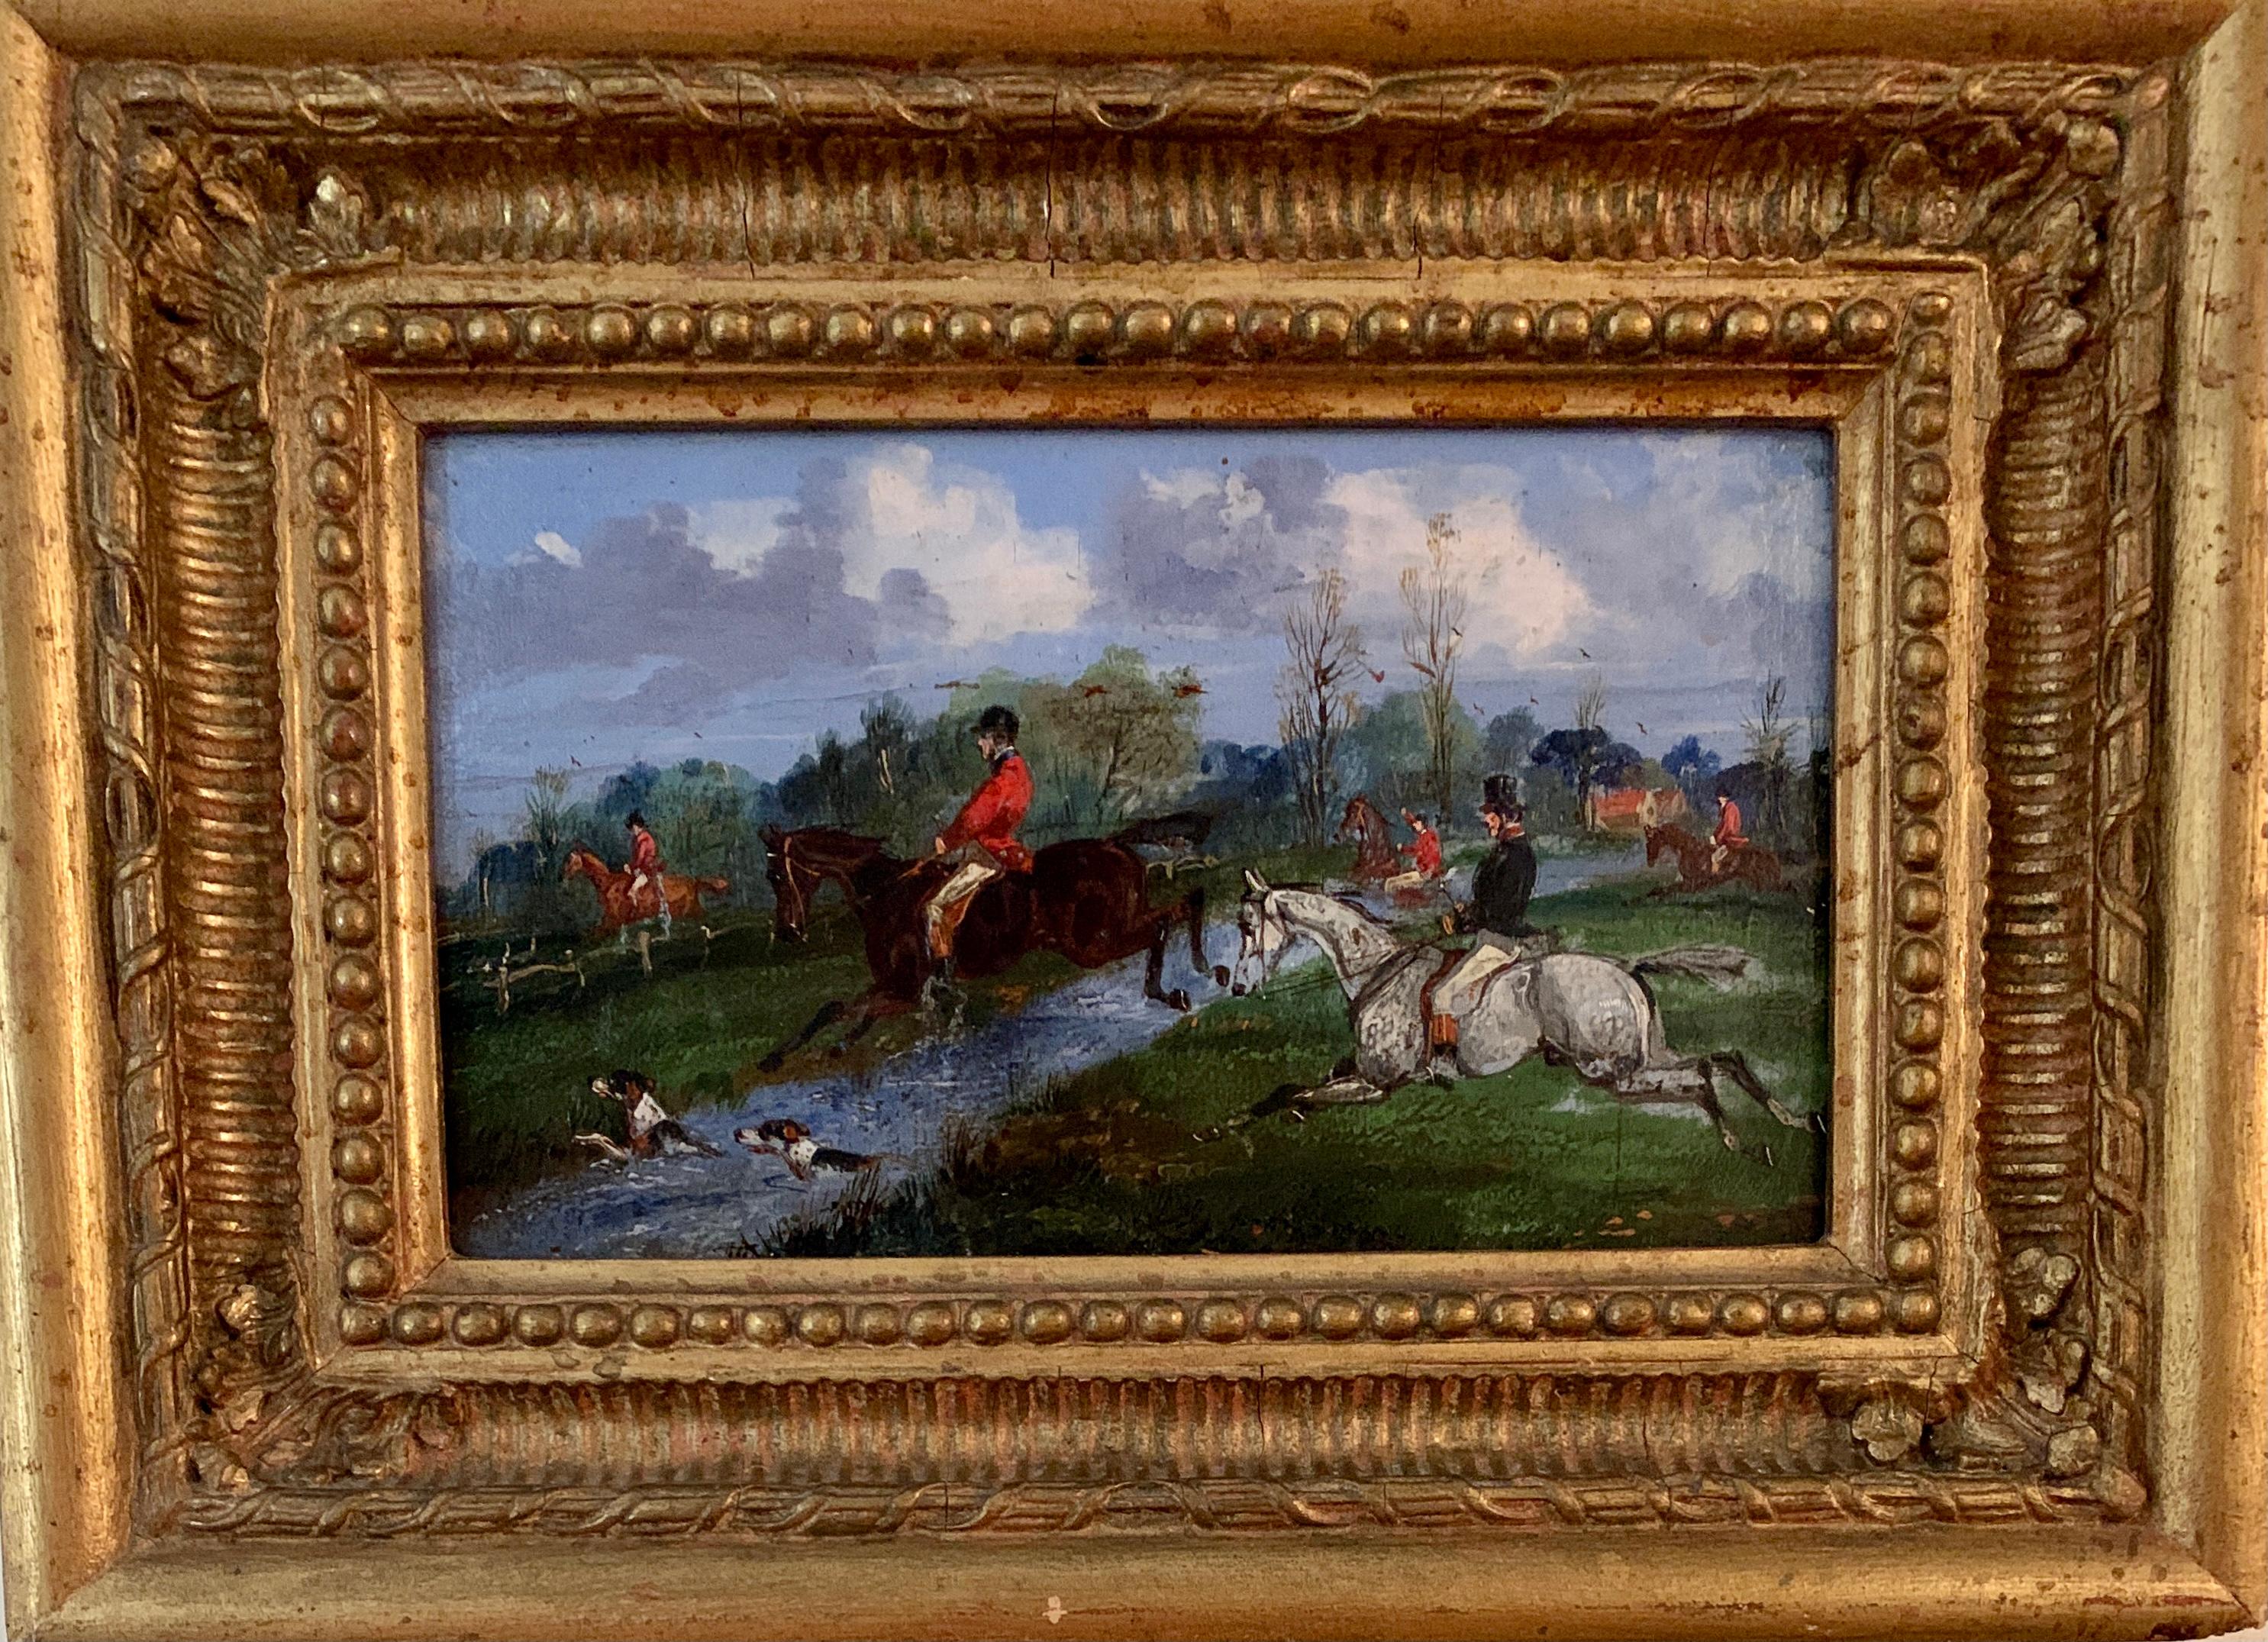 Henry Thomas Alken Landscape Painting - Oil Painting, Antique 19th century Fox hunting with hounds in a landscape horses